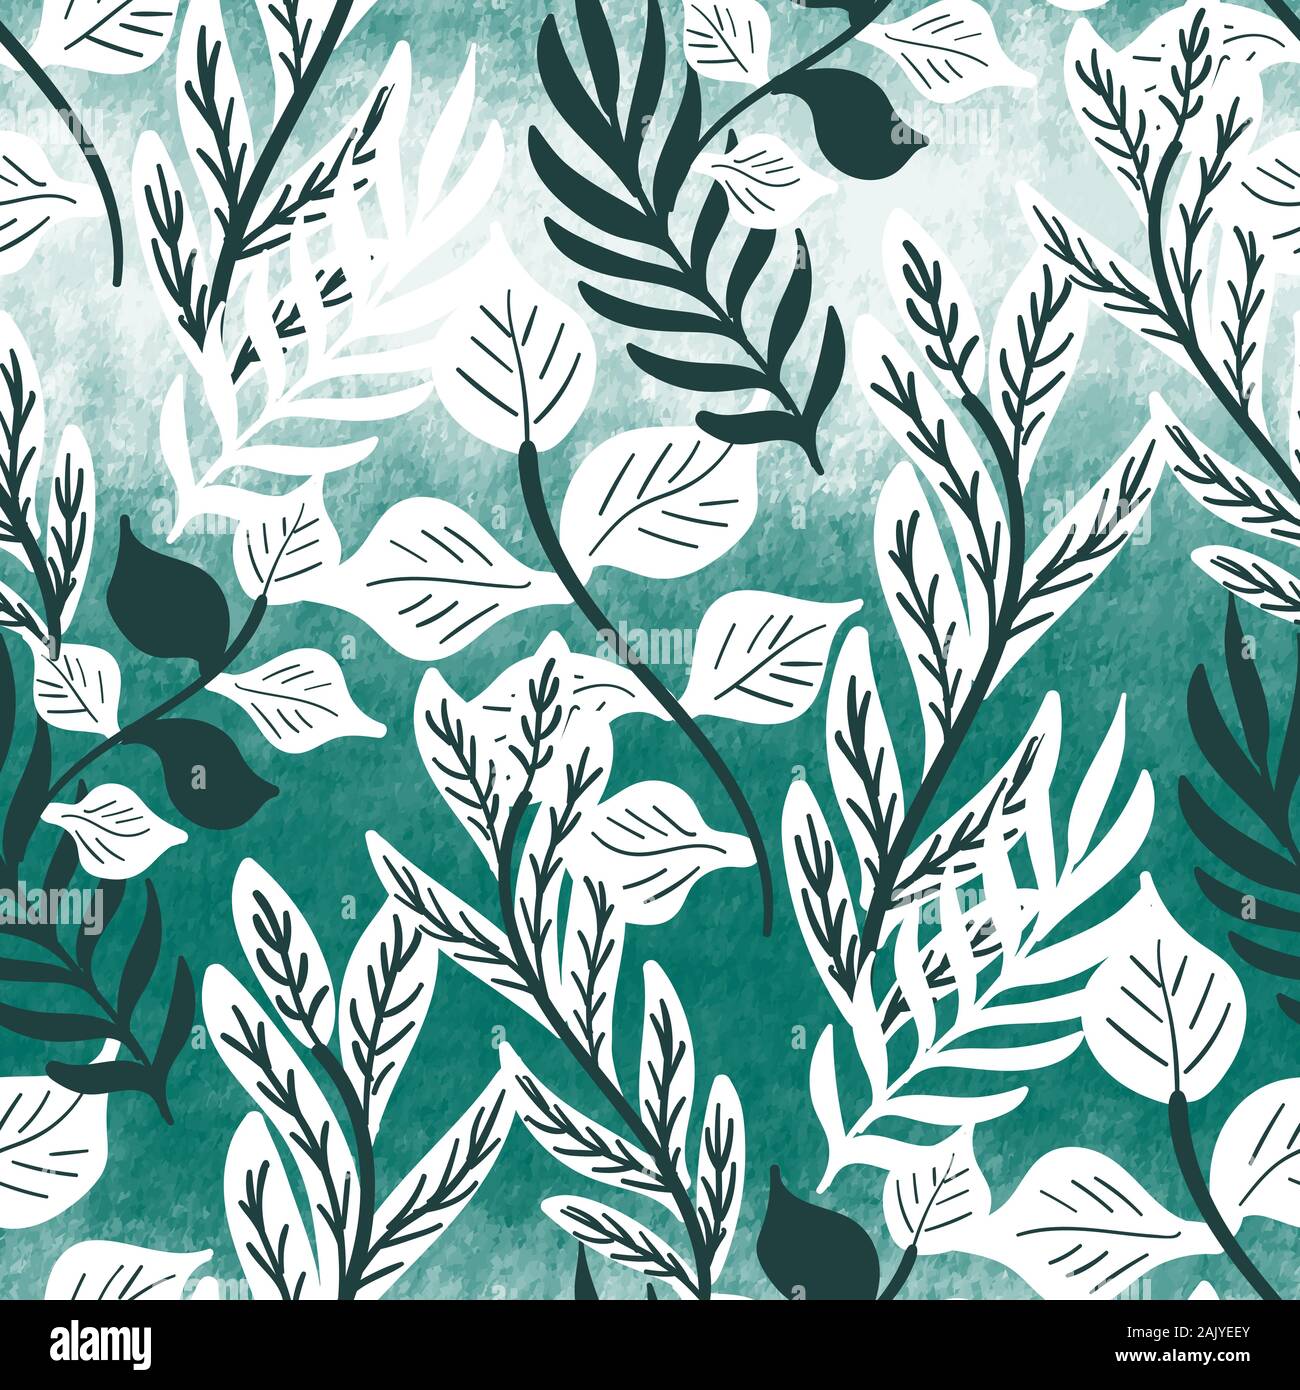 Teal green textured tropical leaf seamless pattern Stock Vector